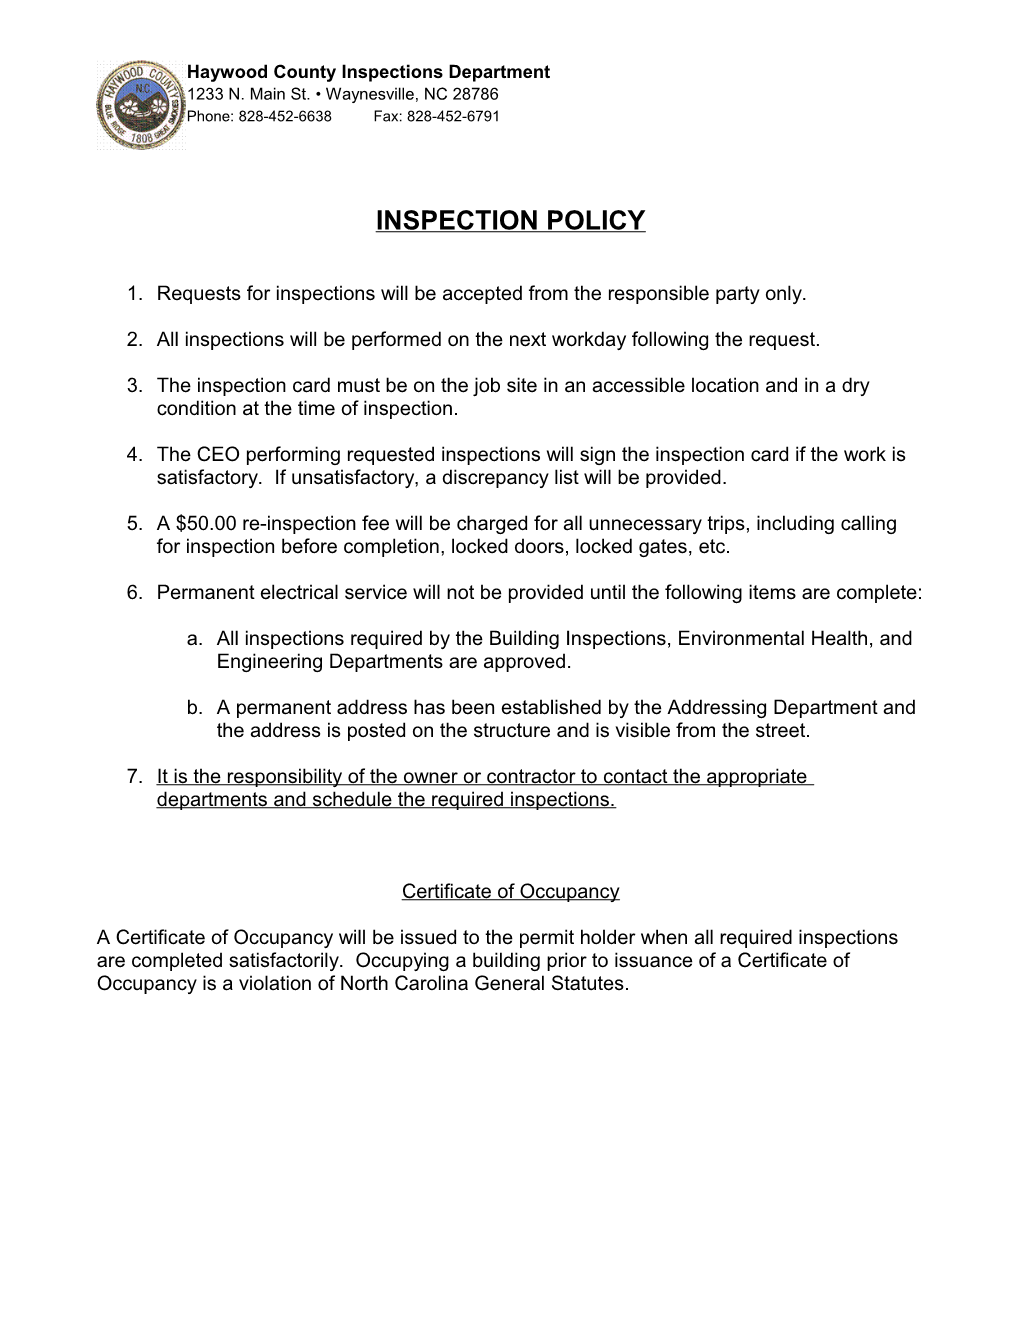 1. Requests for Inspections Will Be Accepted from the Responsible Party Only